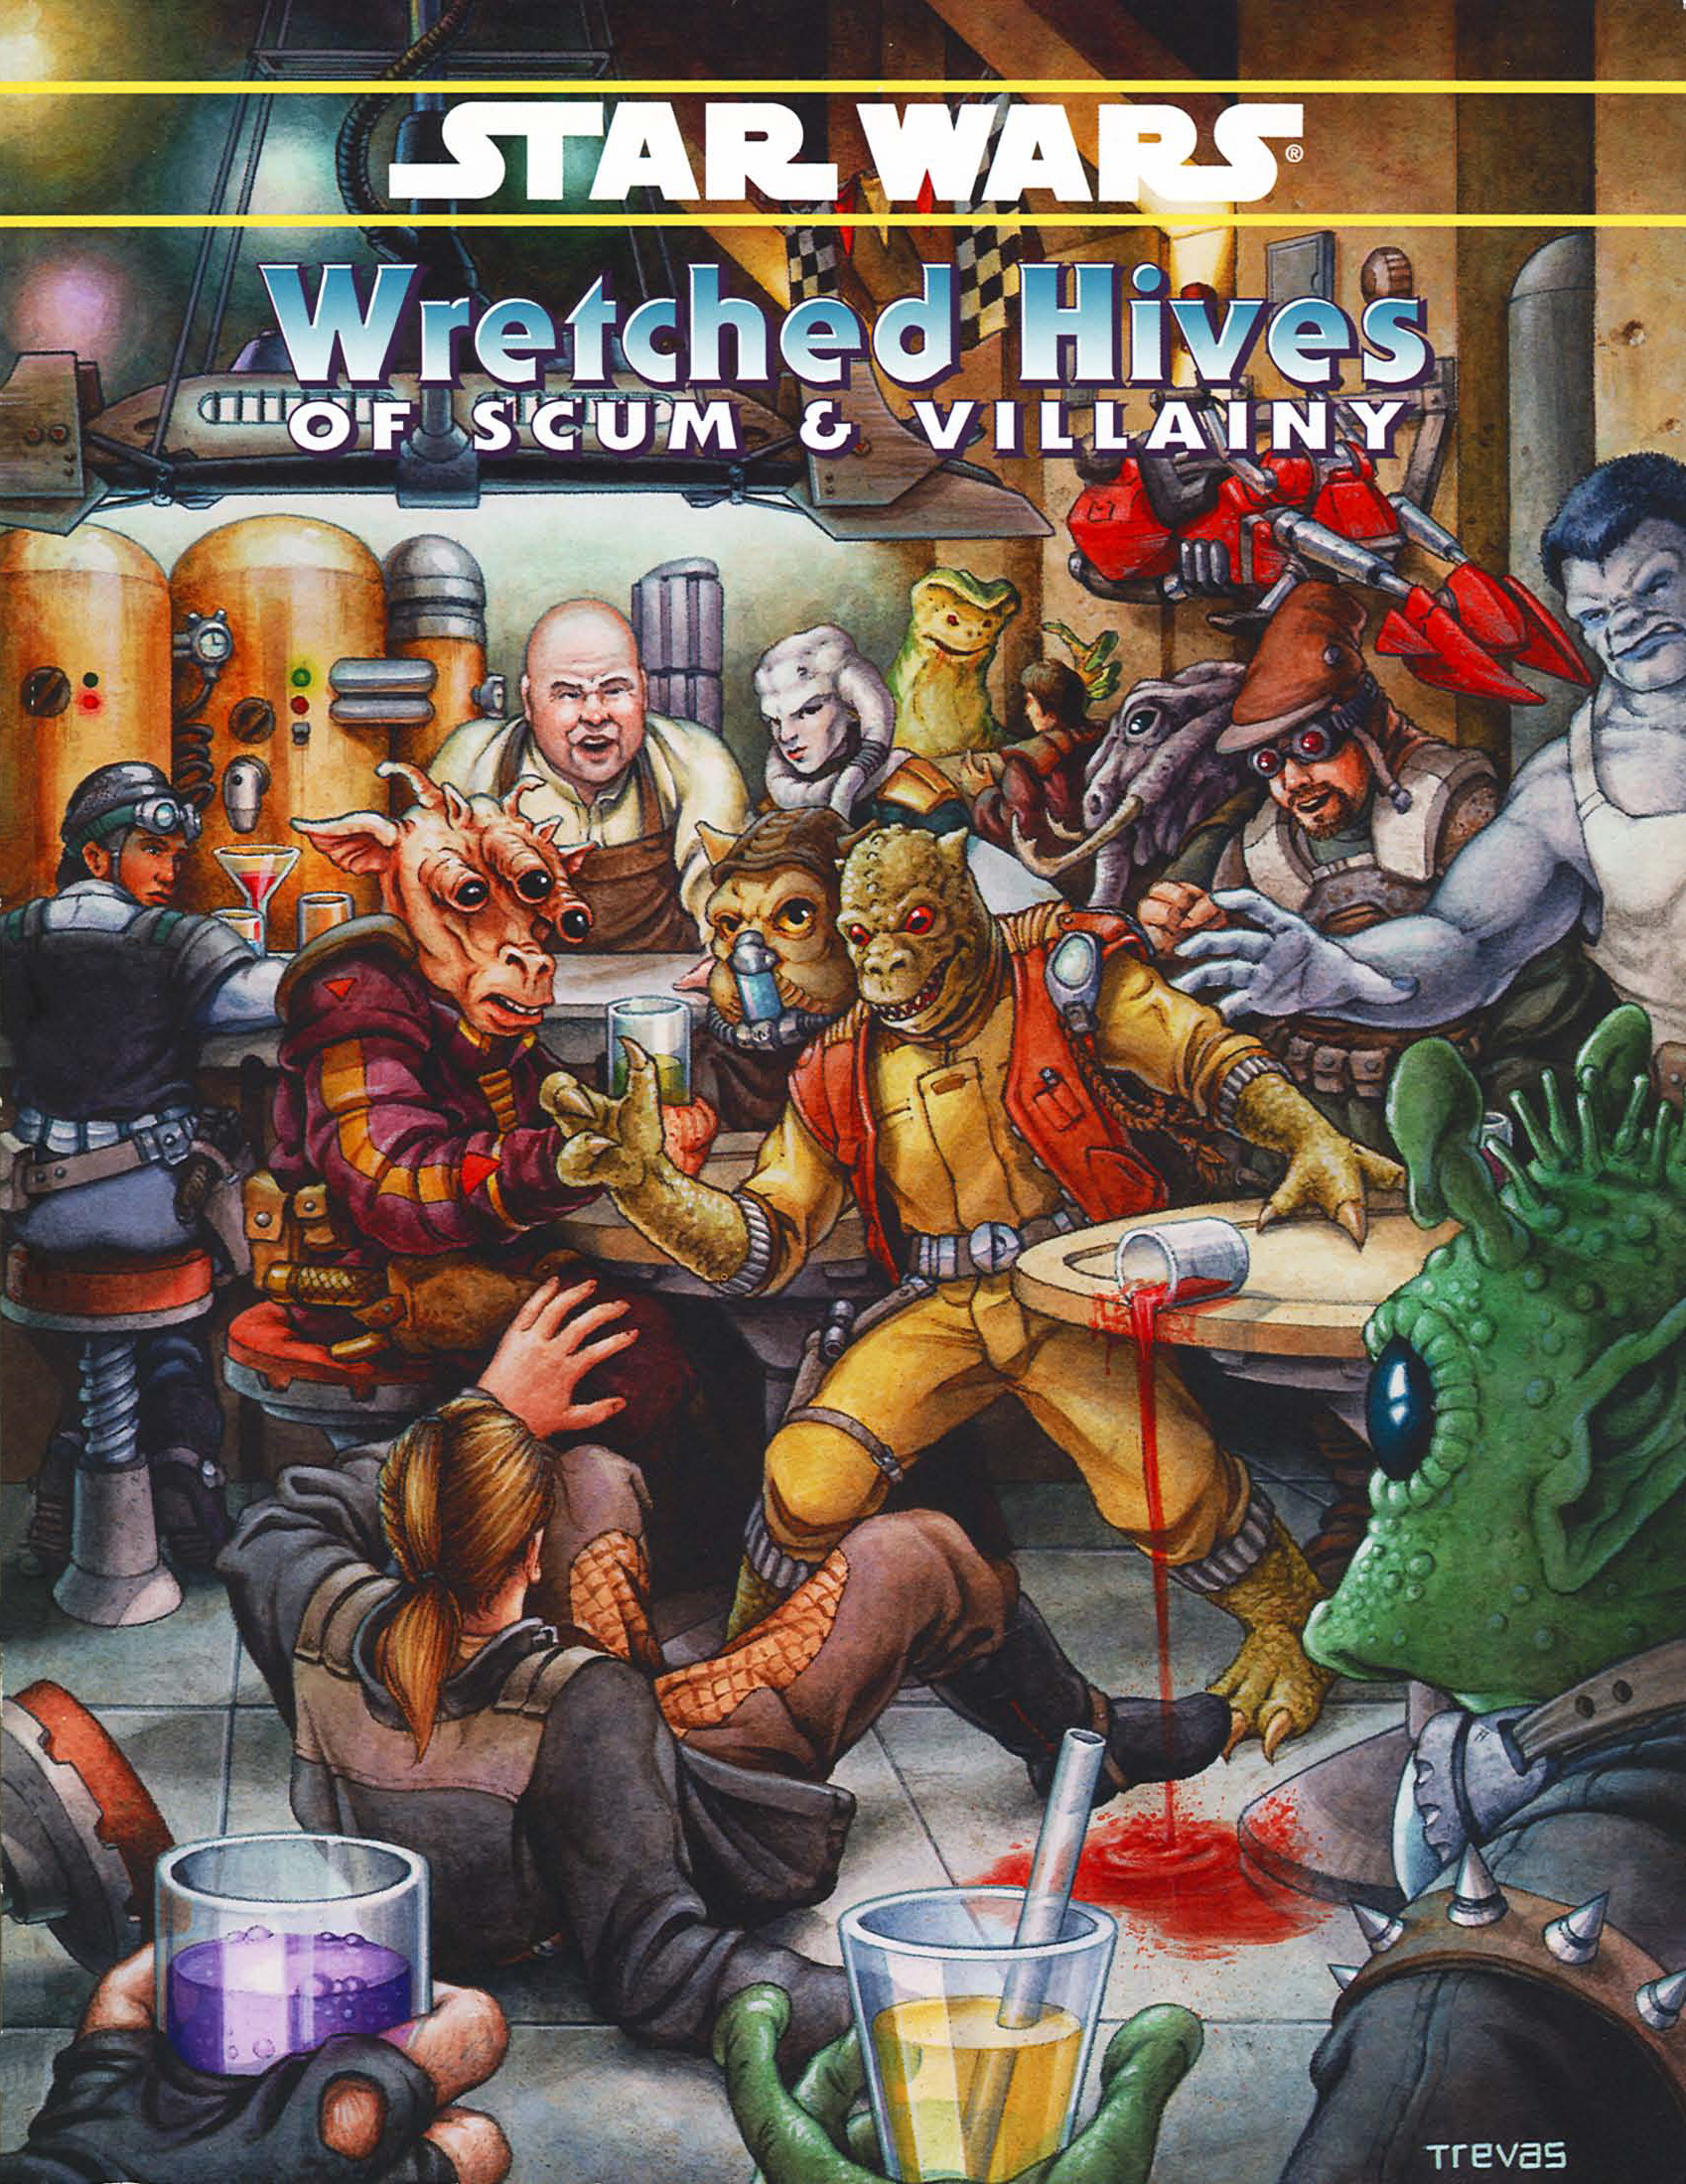 Star Wars RPG - D6 Roleplaying - West End Games - Wayne's Books RPG  Reference